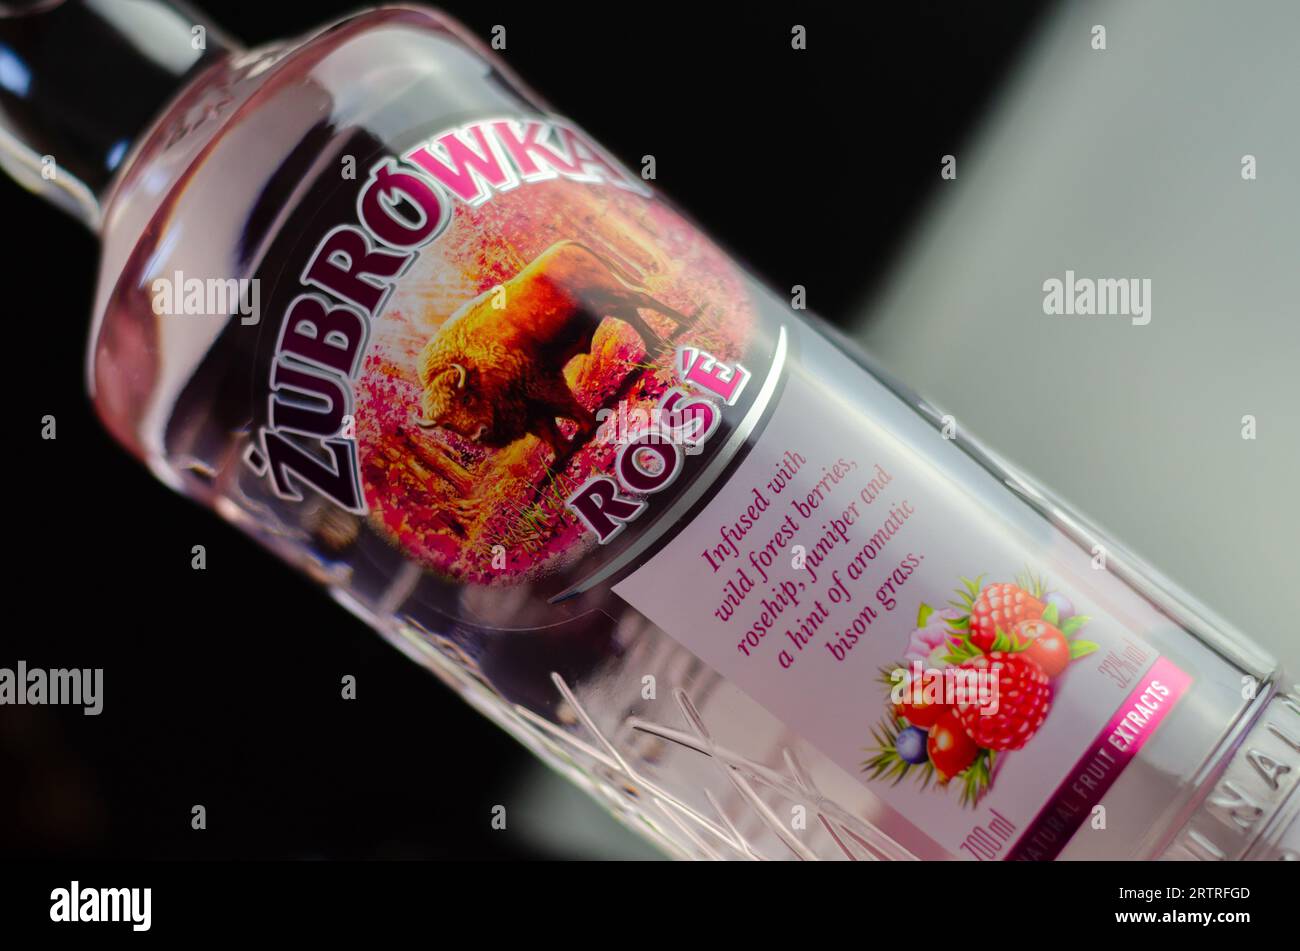 LONDON, UK - 07 SEPTEMBER 2023 Zubrowka Rose is a Polish flavored vodka from the creators of Zubrowka Bison Grass with a bison grass flavor and ingred Stock Photo